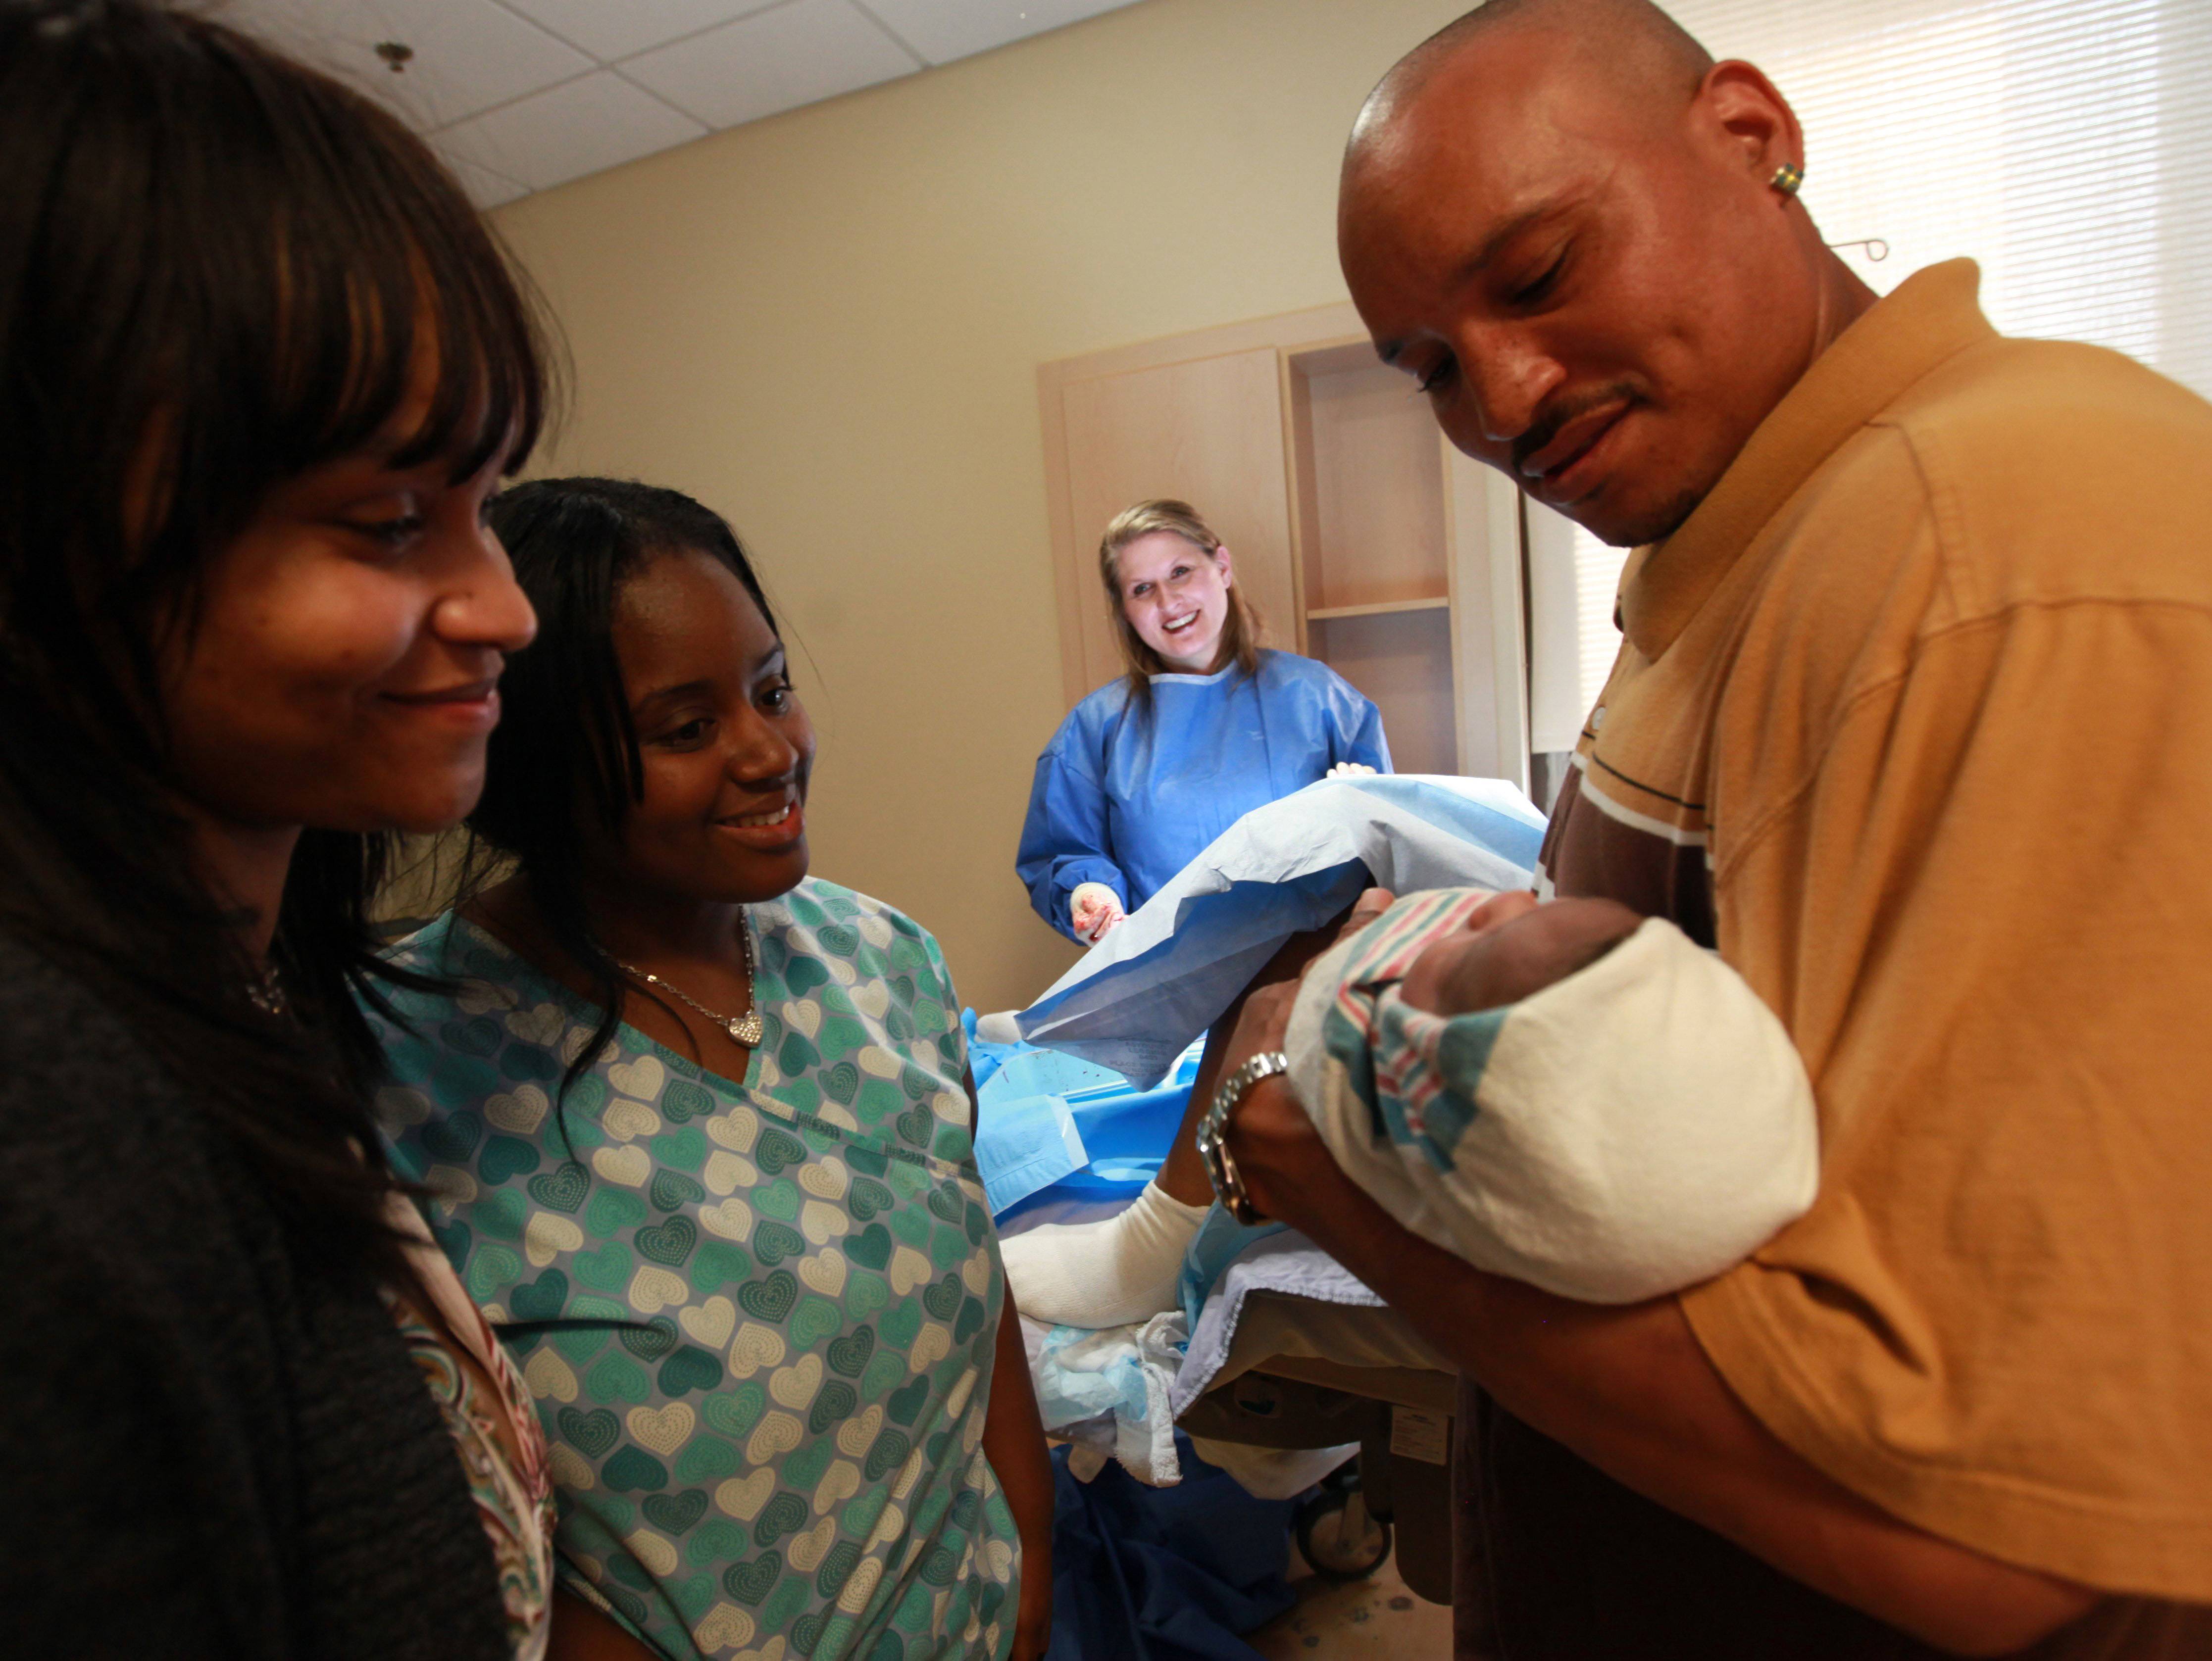 Minority Babies Are the Majority - For the first time in modern U.S. history, minorities make up the majority of the nation’s babies, according to an Associated Press report. A growing Hispanic population, intermarriage and immigration are said to be behind the trend. (Photo: Mandi Wright/Detroit Free Press/MCT)